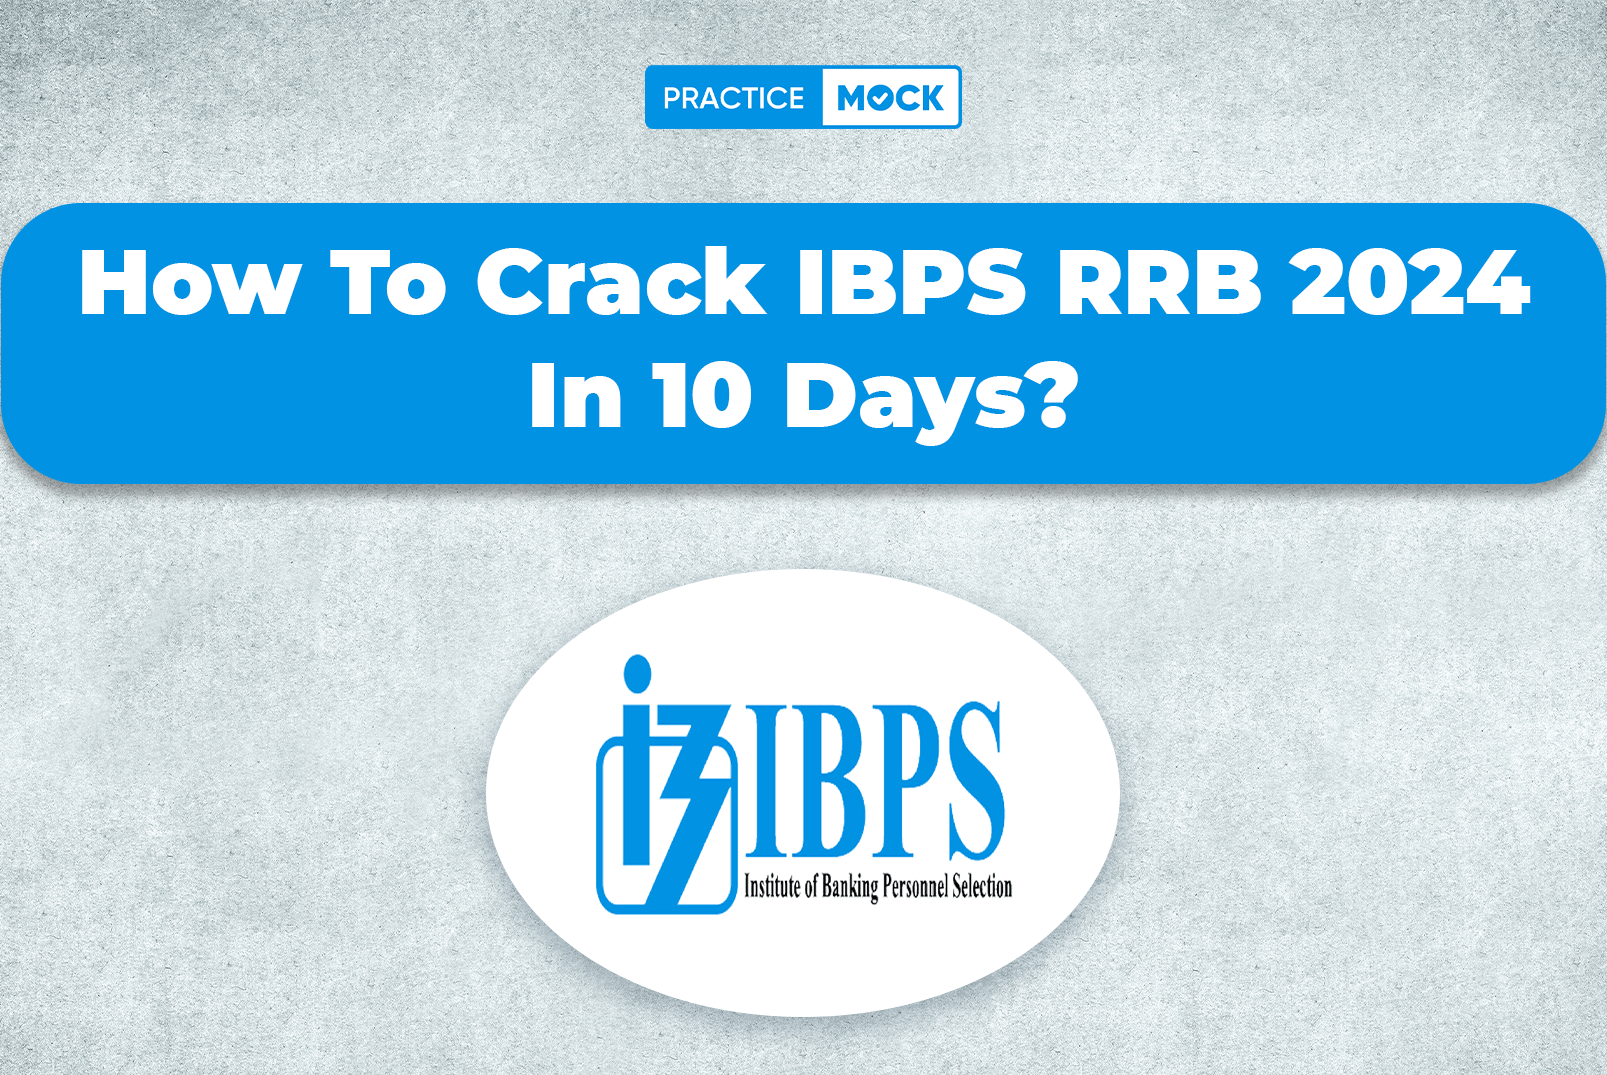 How To Crack IBPS RRB 2024 In 10 Days?